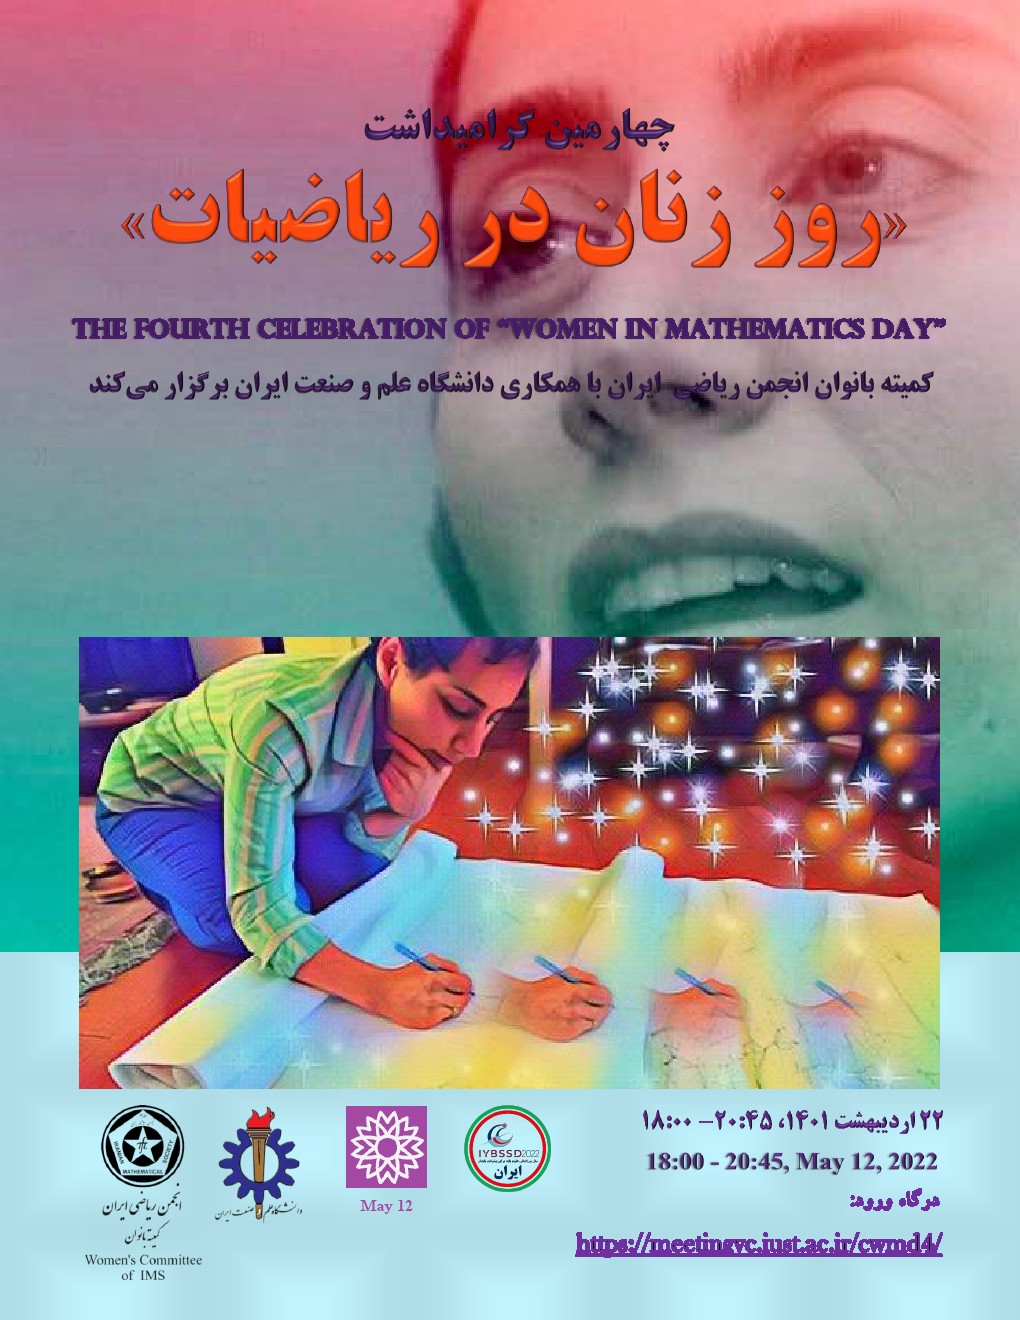 The Fourth Celebration of "Women in Mathematics Day"